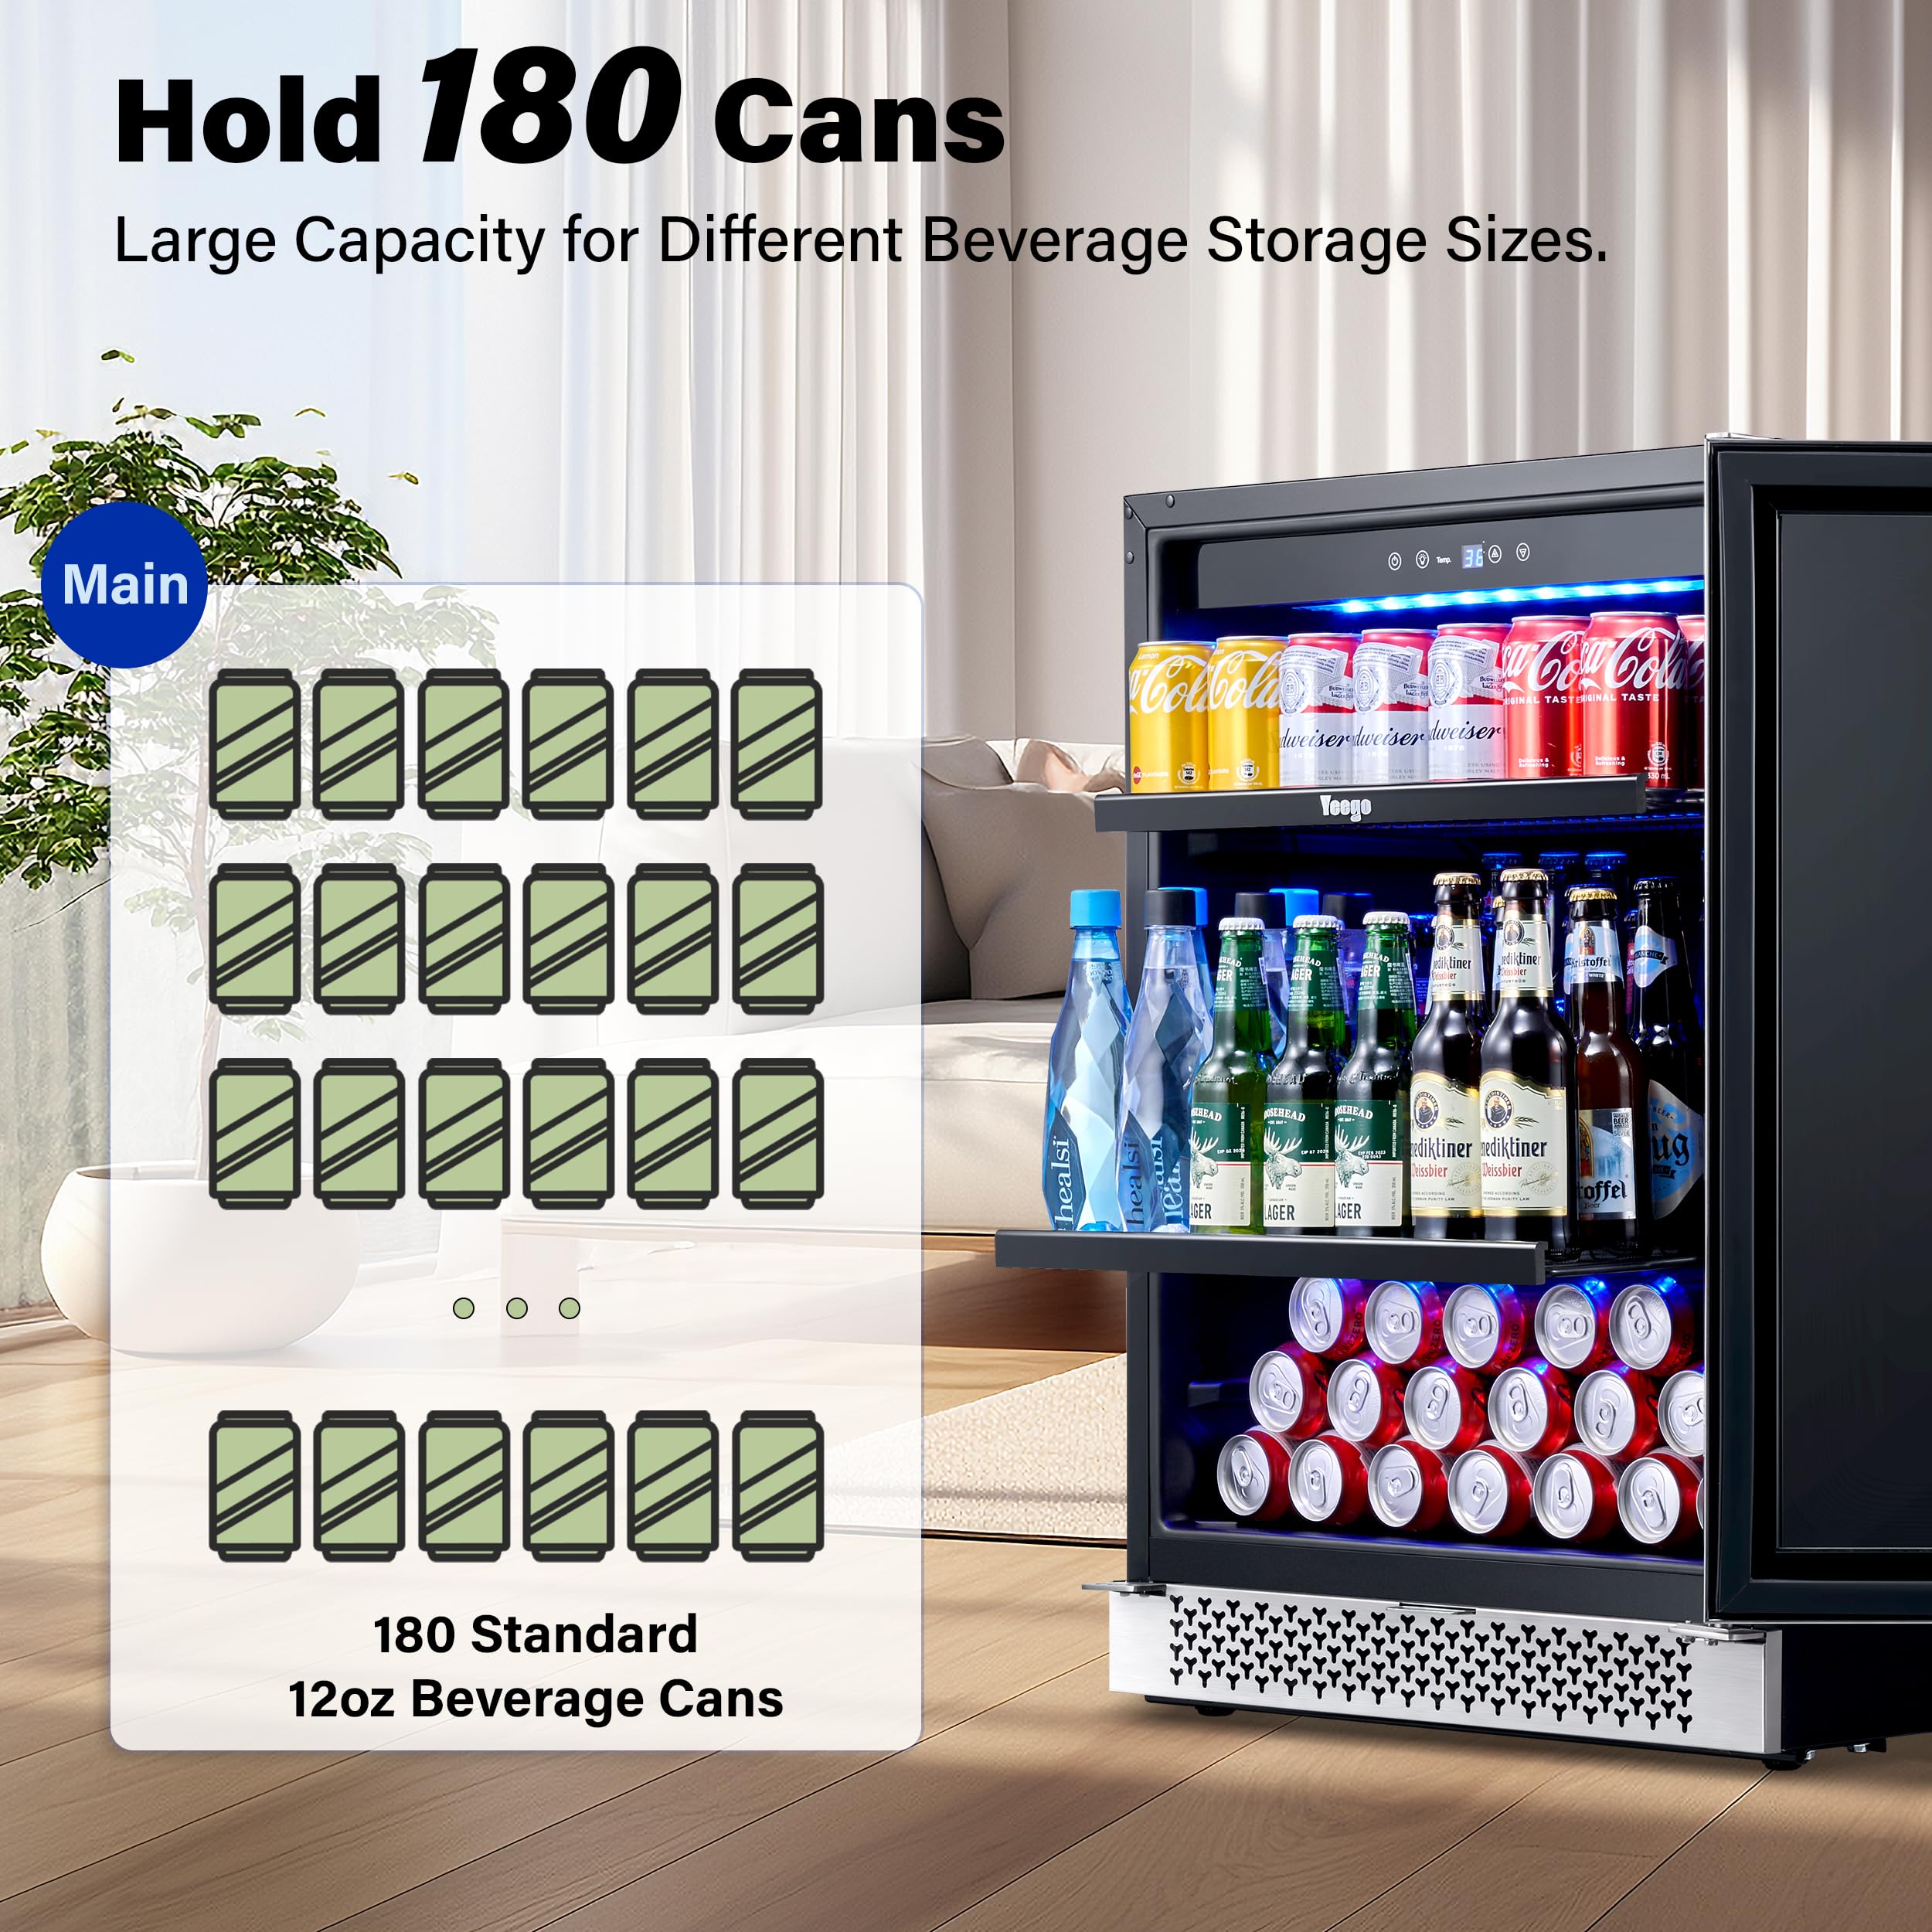 Yeego 24 Inch Beverage Refrigerator, 180 can Beer Fridge with Advanced Cooling System(34-54°F), Beverage Cooler Built-in or Freestanding for Drink Beer Soda Wine Water, Quiet Operation, Blue LED Light